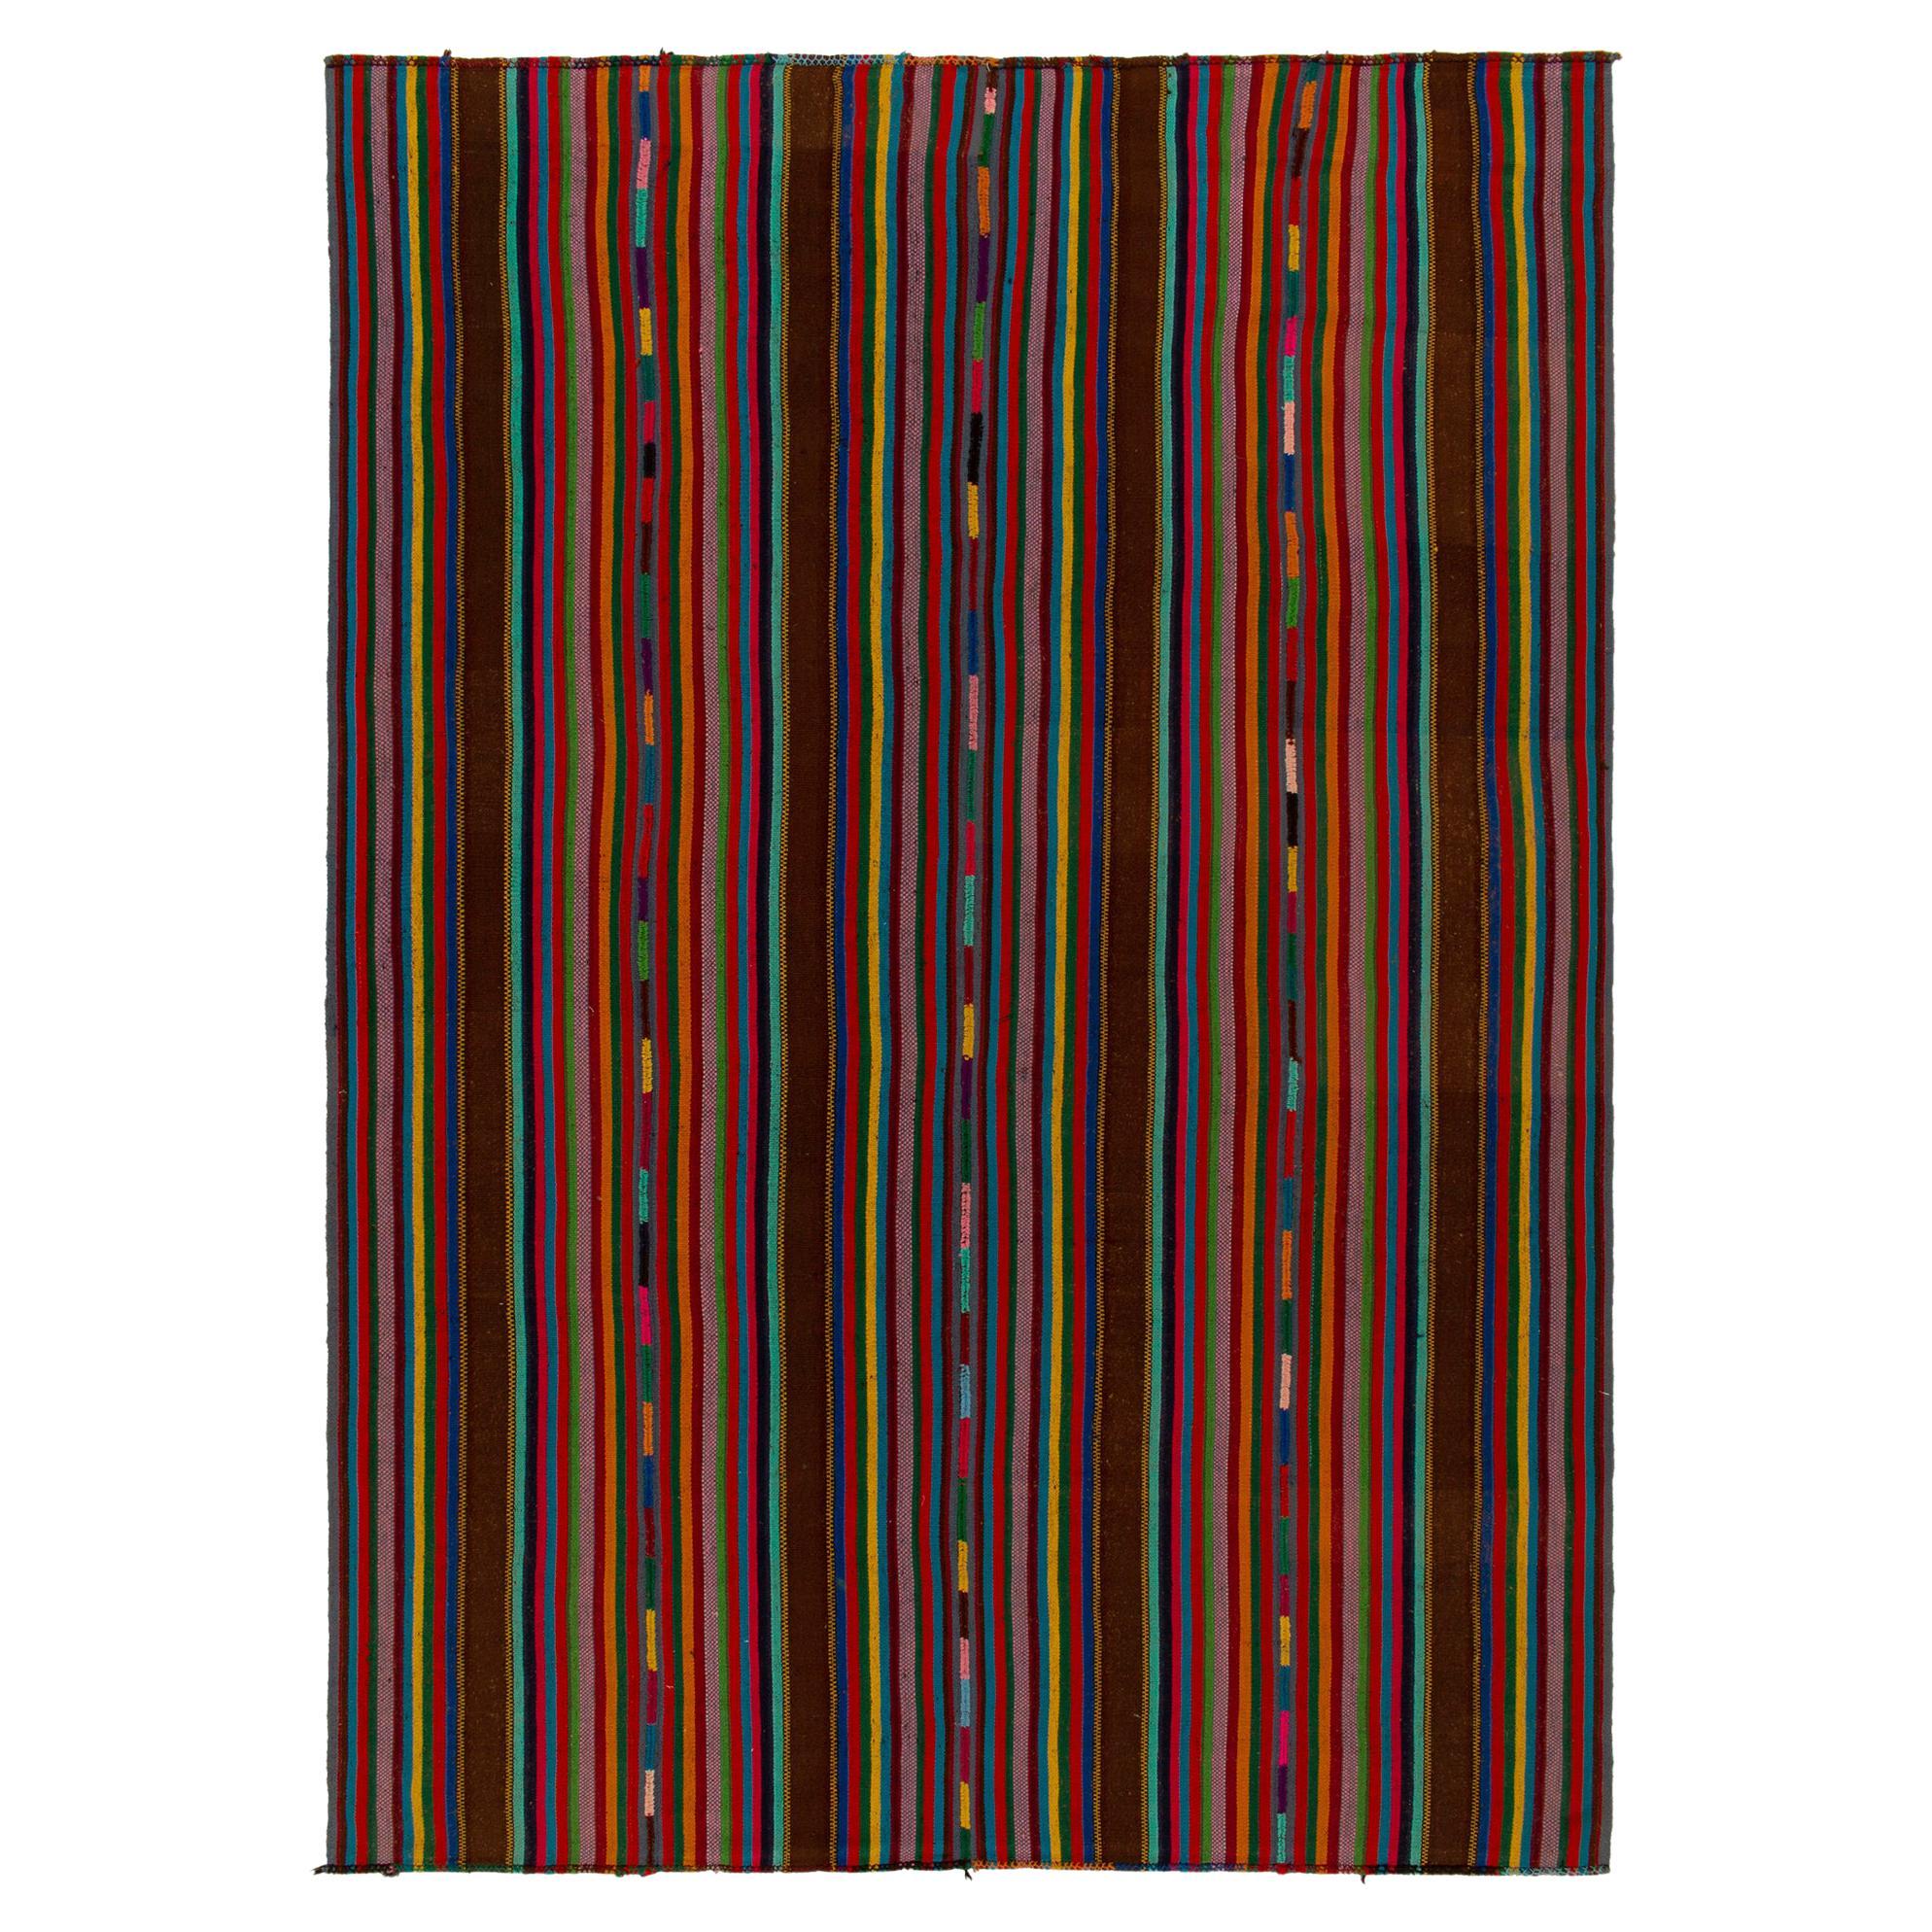 1950s Vintage Chaput Kilim Style in, Multicolor Striped Patterns by Rug & Kilim